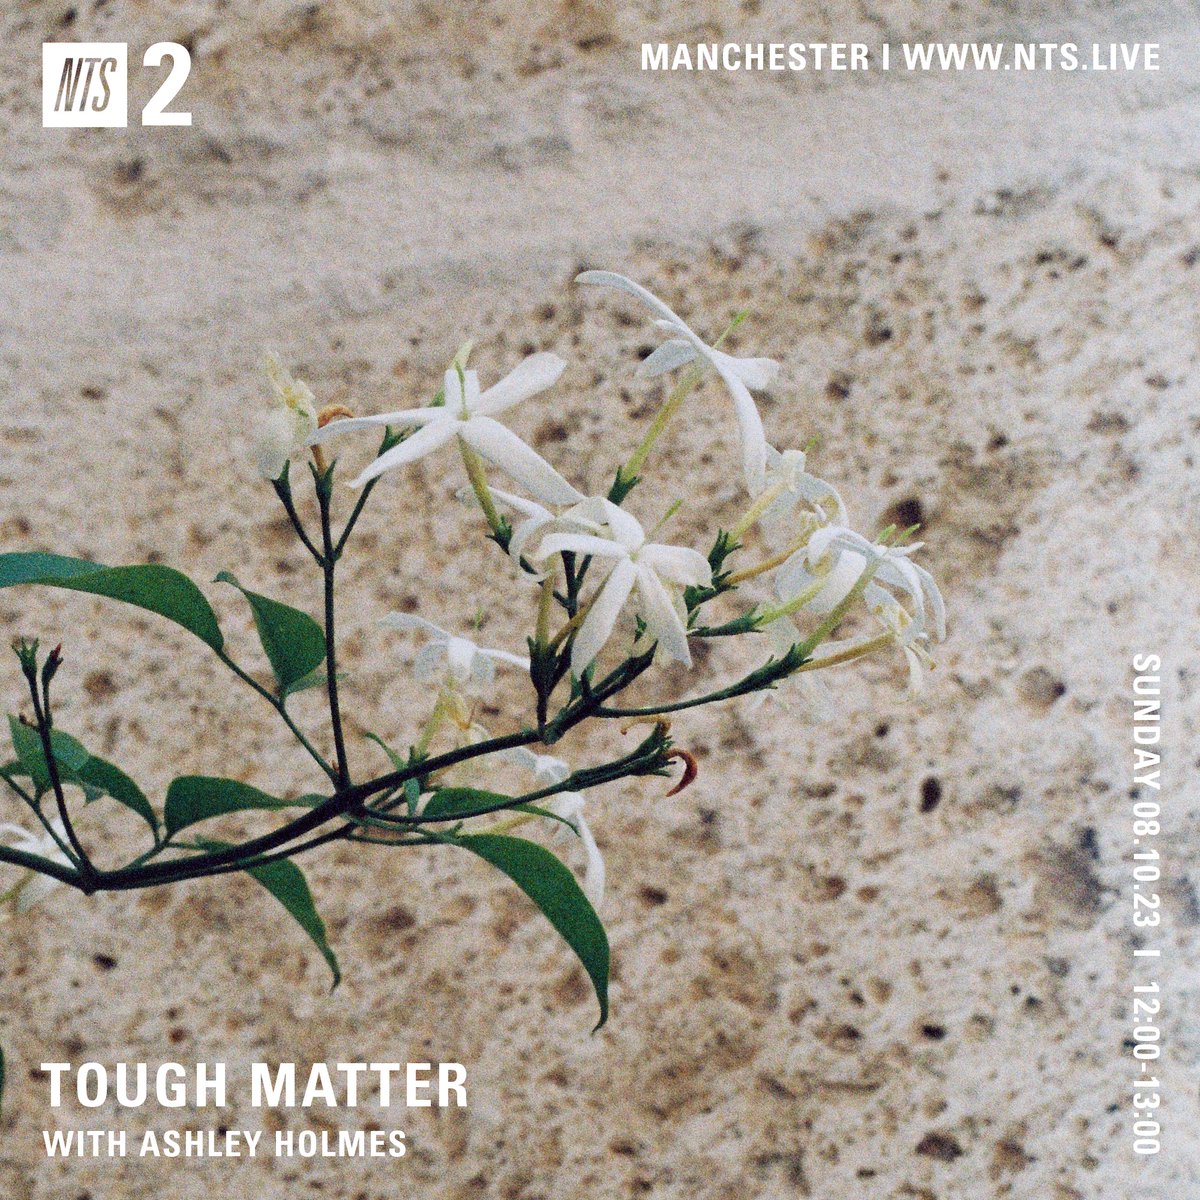 Next Tough Matter on @NTSlive is going out today Channel 2 from midday, if you wanna tune in 🎋🔖